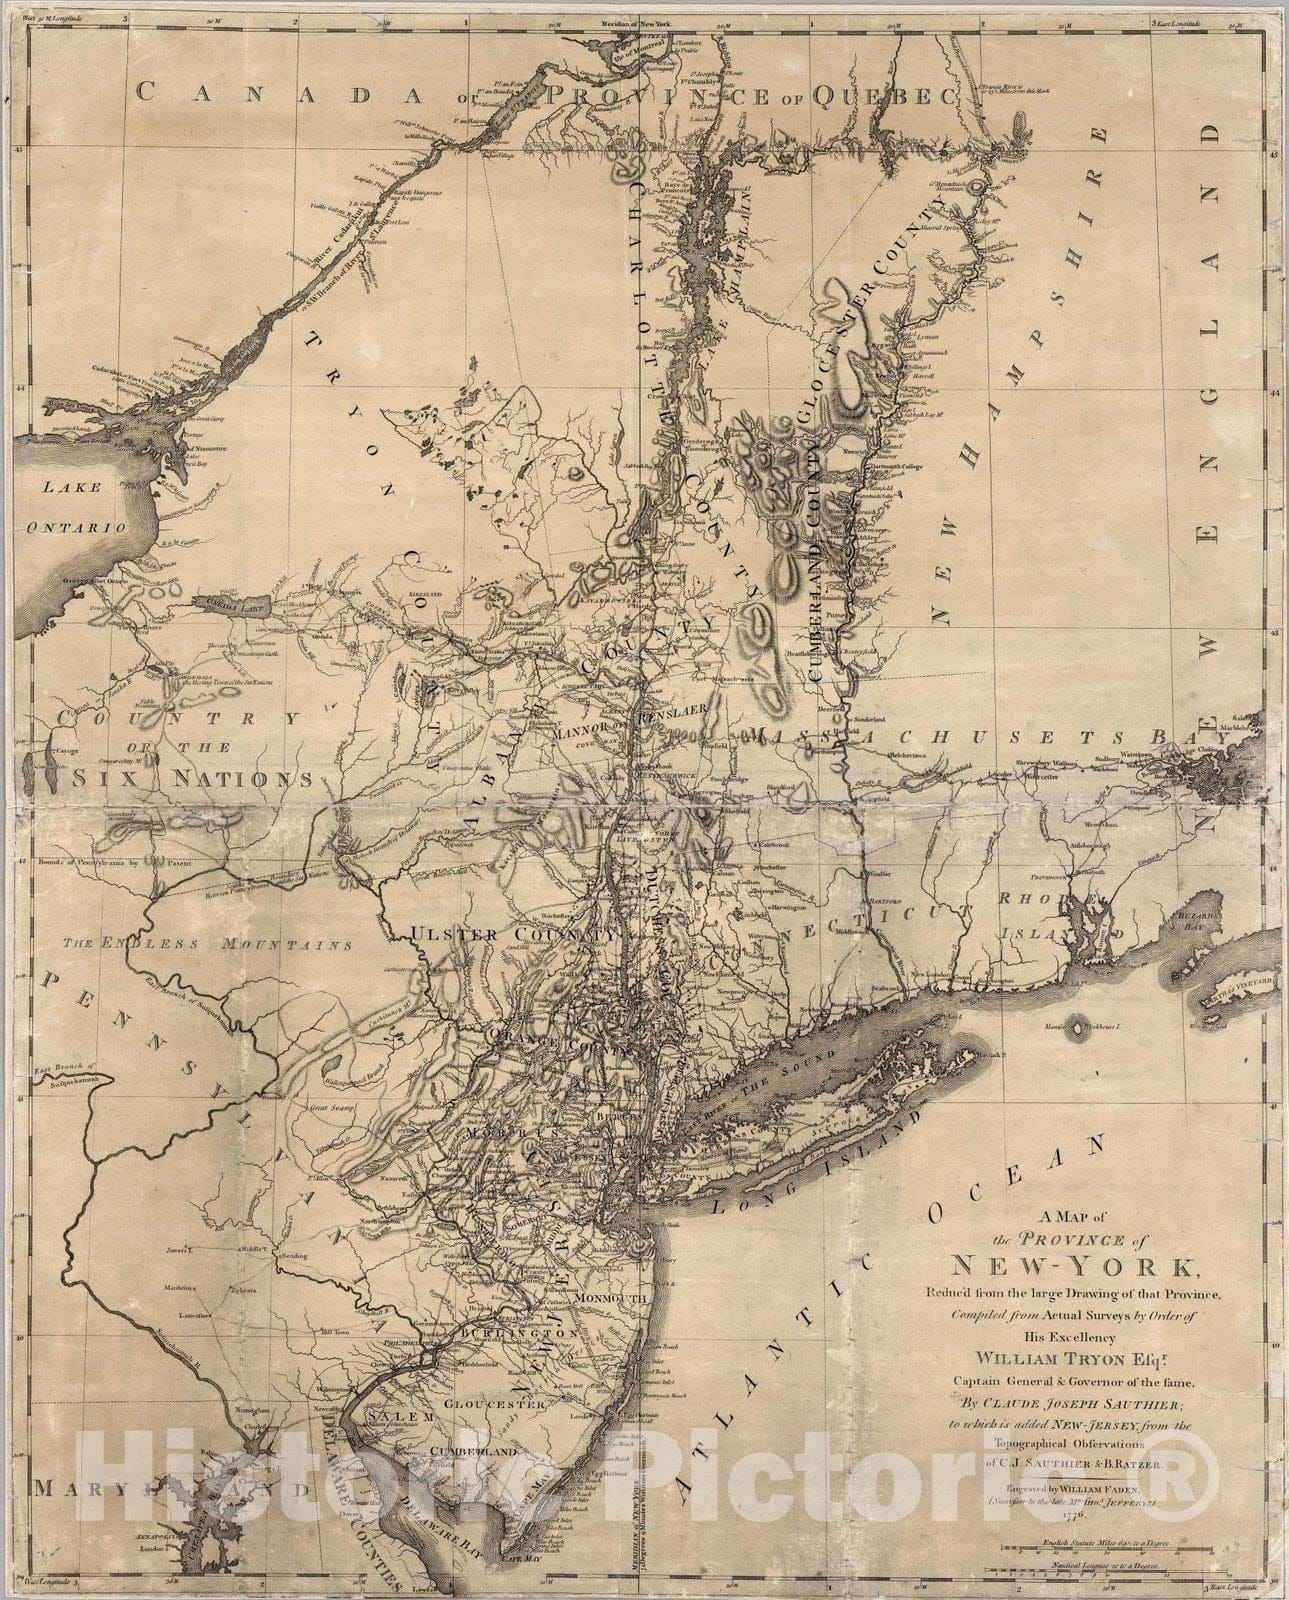 Historic Wall Map : Map of the Province of New - York, 1776 - Vintage Wall Art